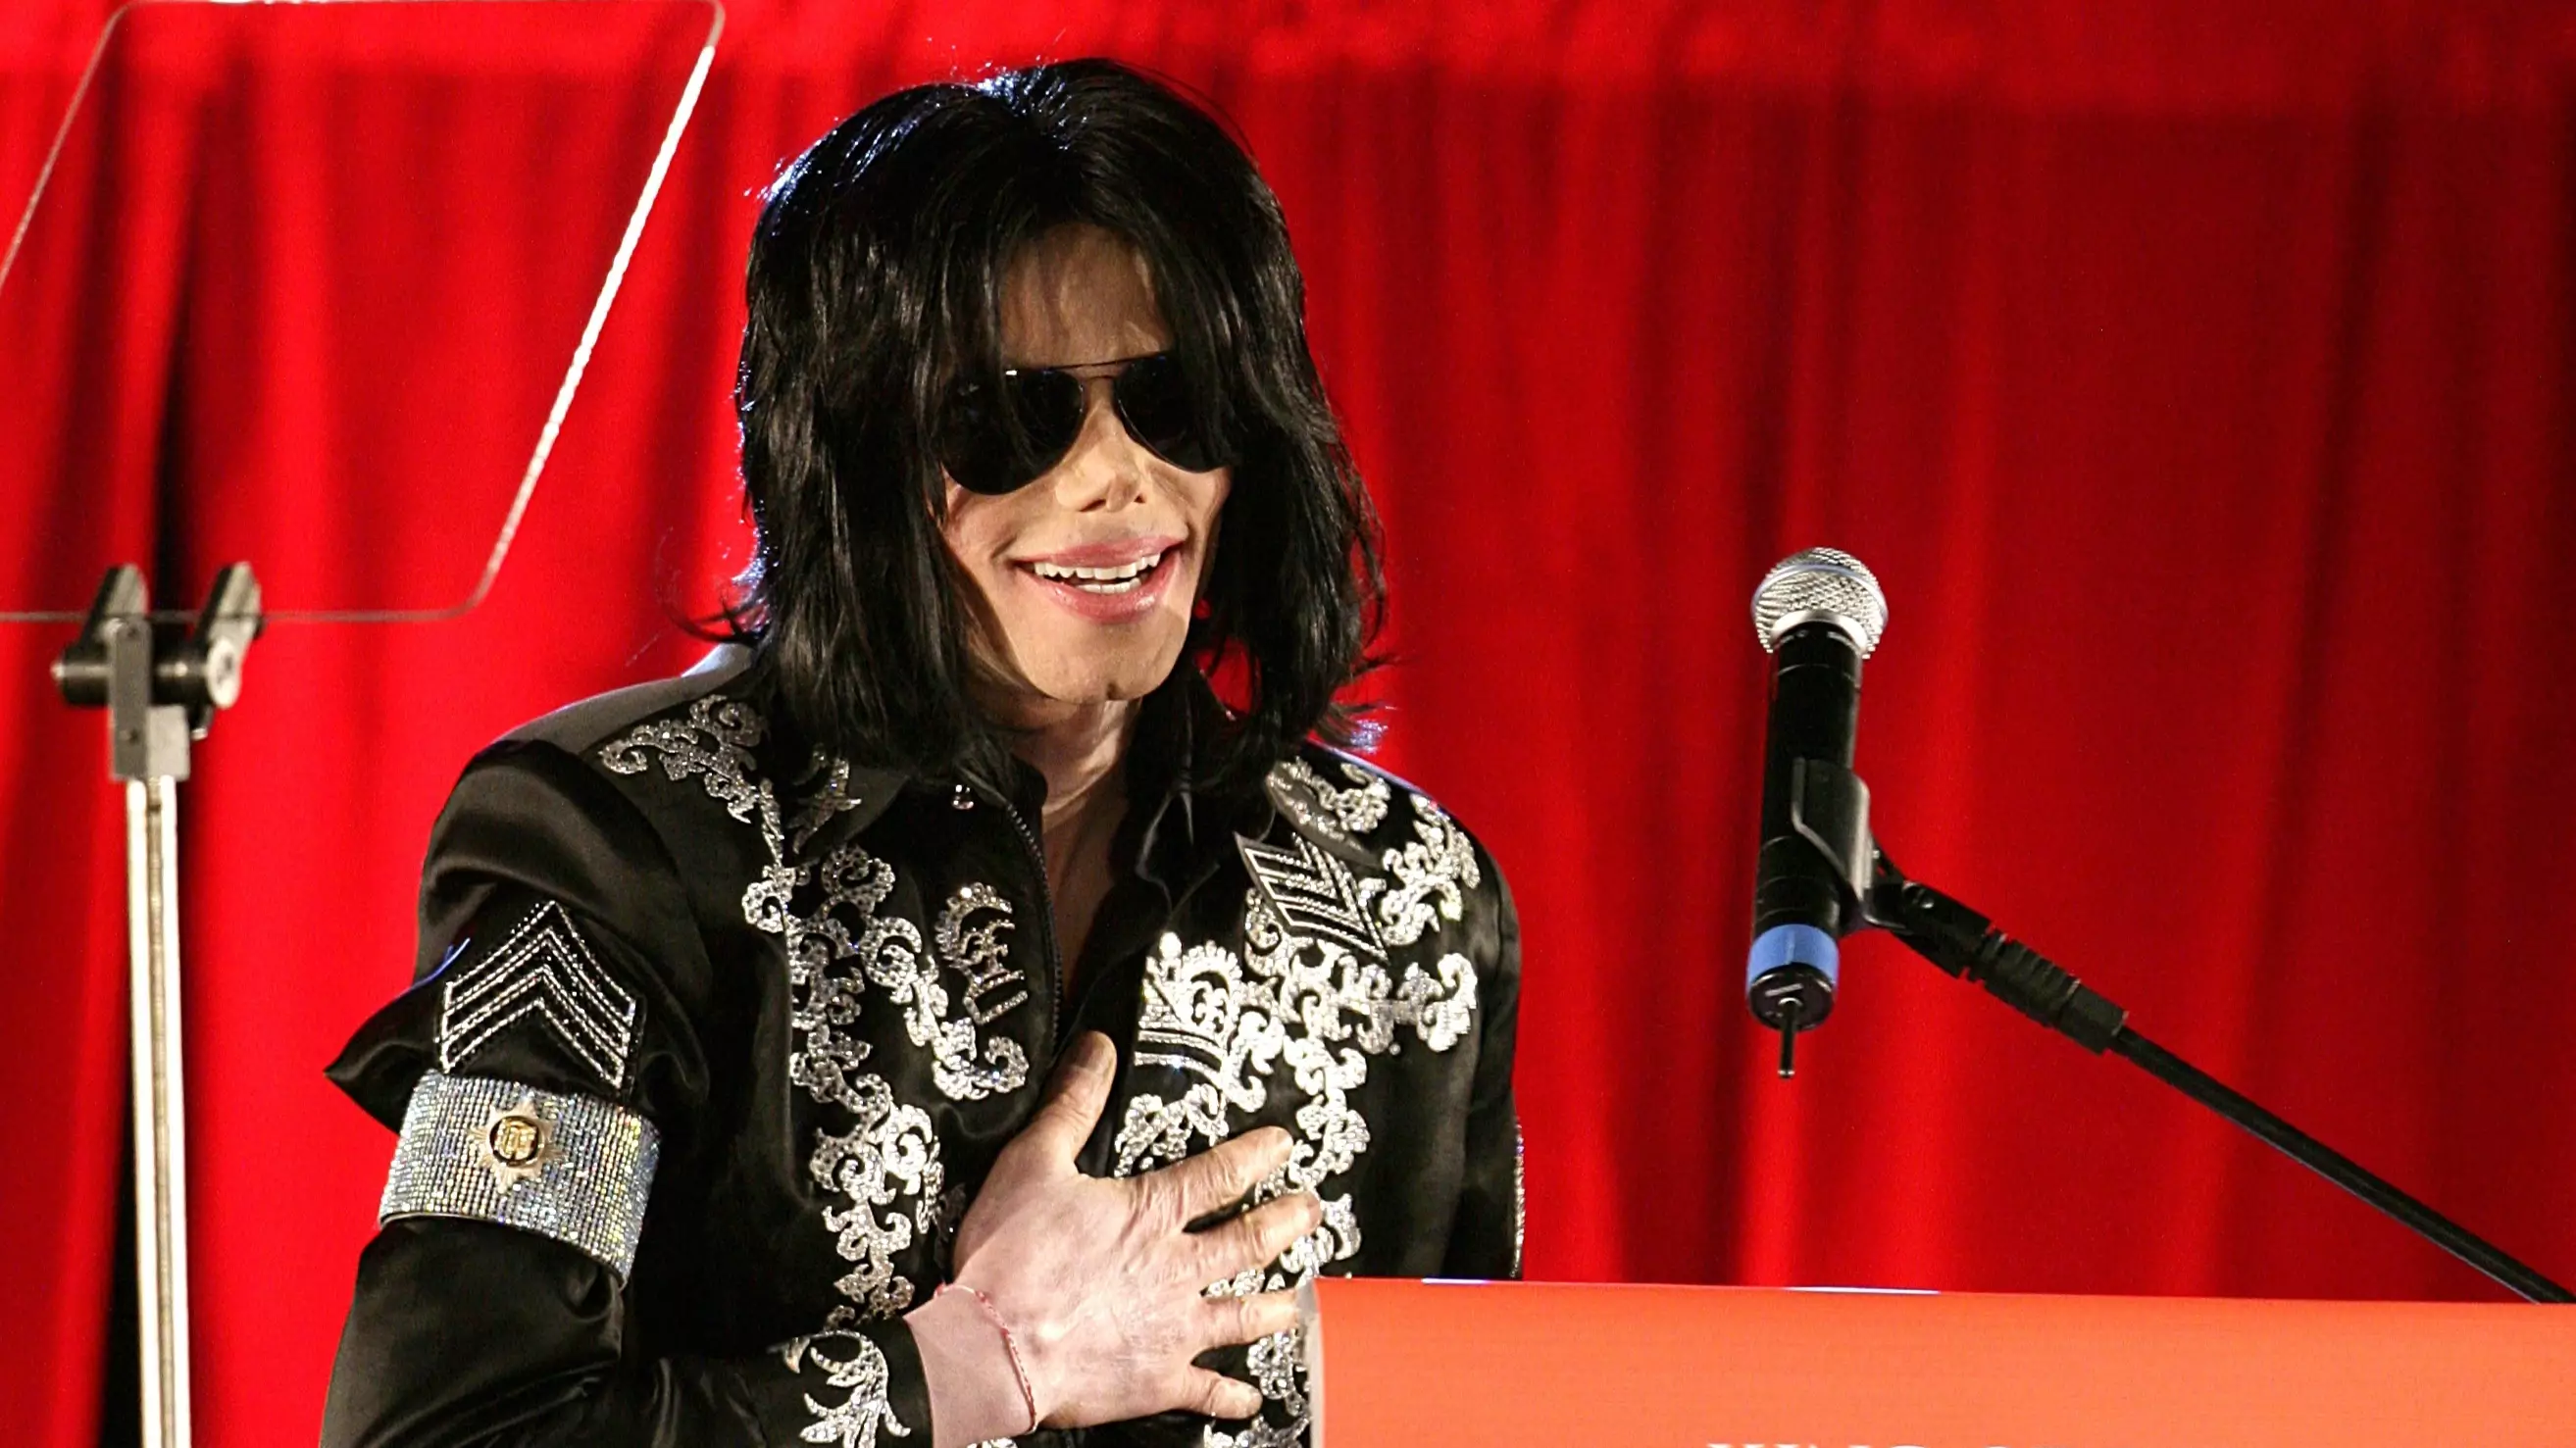 Michael Jackson 'Married' 10-Year-Old Boy, Claims New Documentary